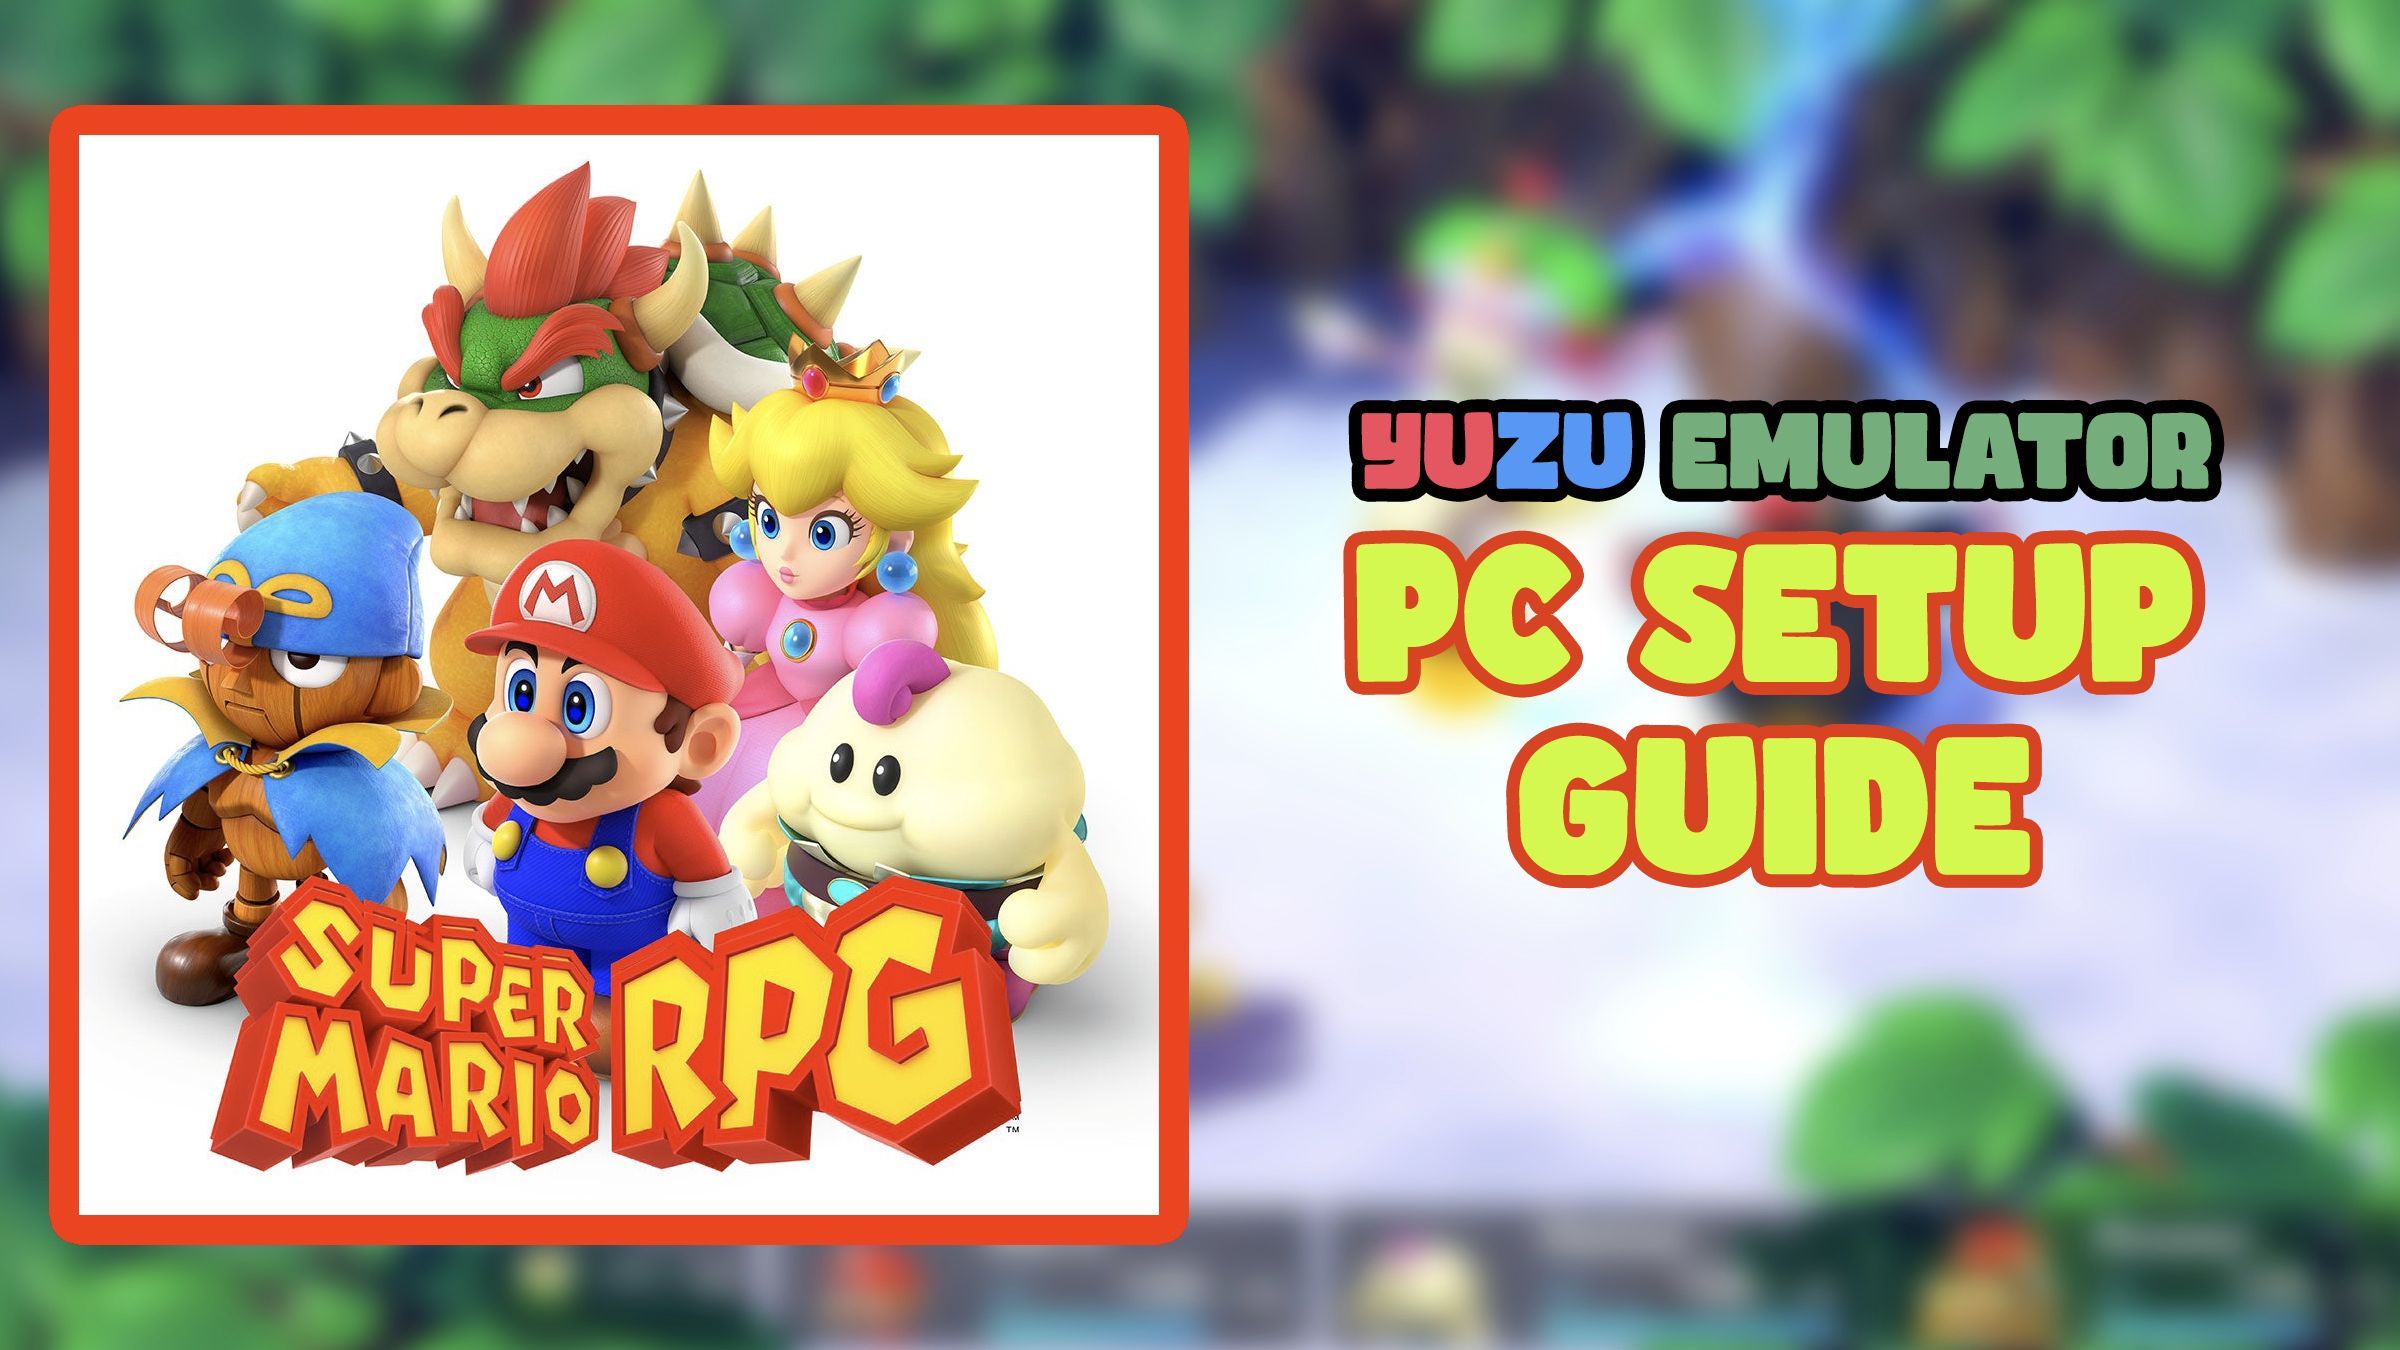 How to download and play Super Mario RPG Remake on PC (XCI) YUZU-RYUJINX  GUIDE - Bstation